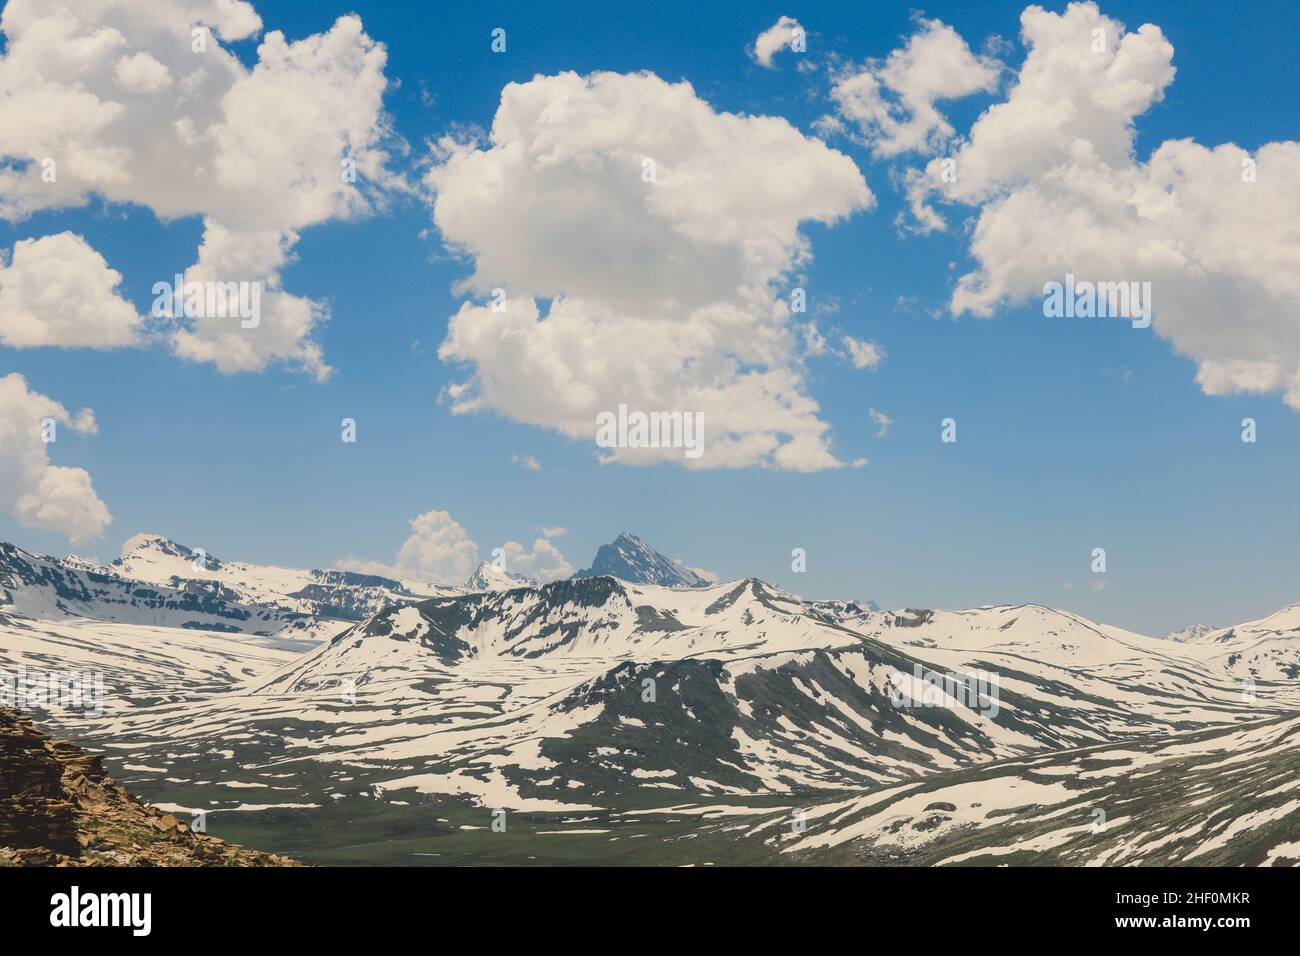 Amazing View to the Snow Capped Mountain Peaks in the Gilgit Baltistan Highlands under the Blue Sky, Pakistan Stock Photo